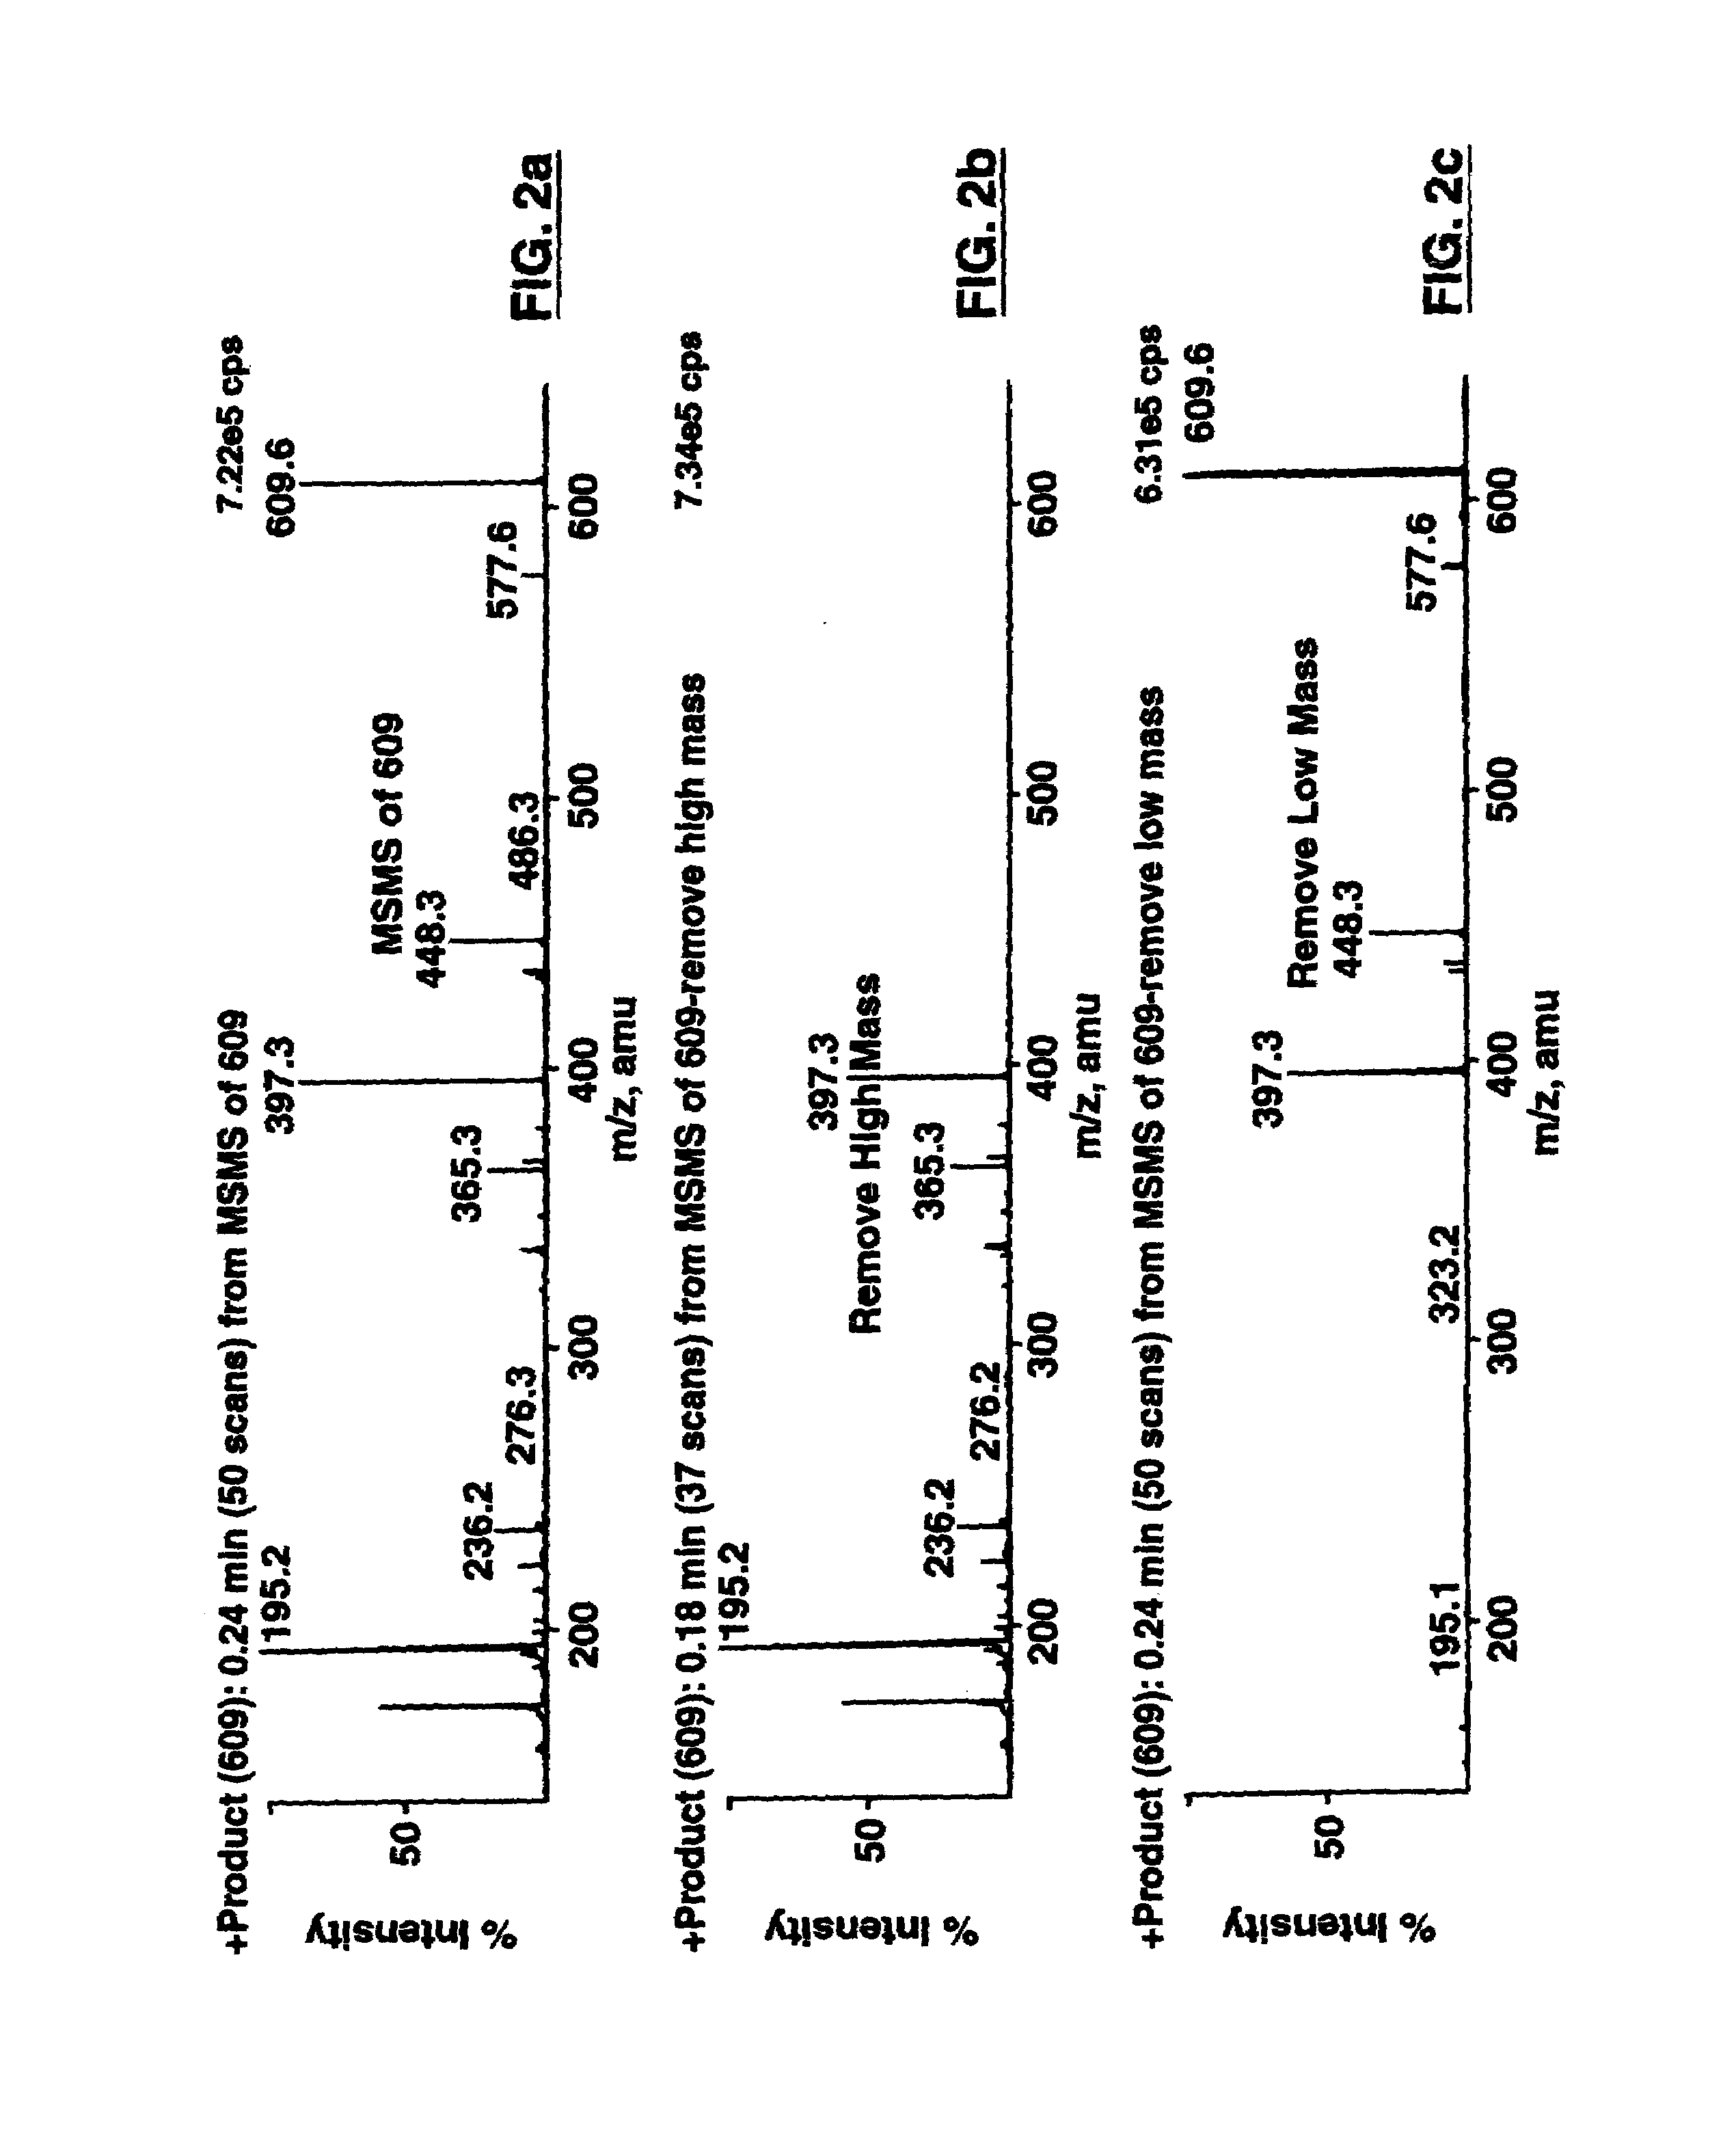 Triple quadrupole mass spectrometer with capability to perform multiple mass analysis steps